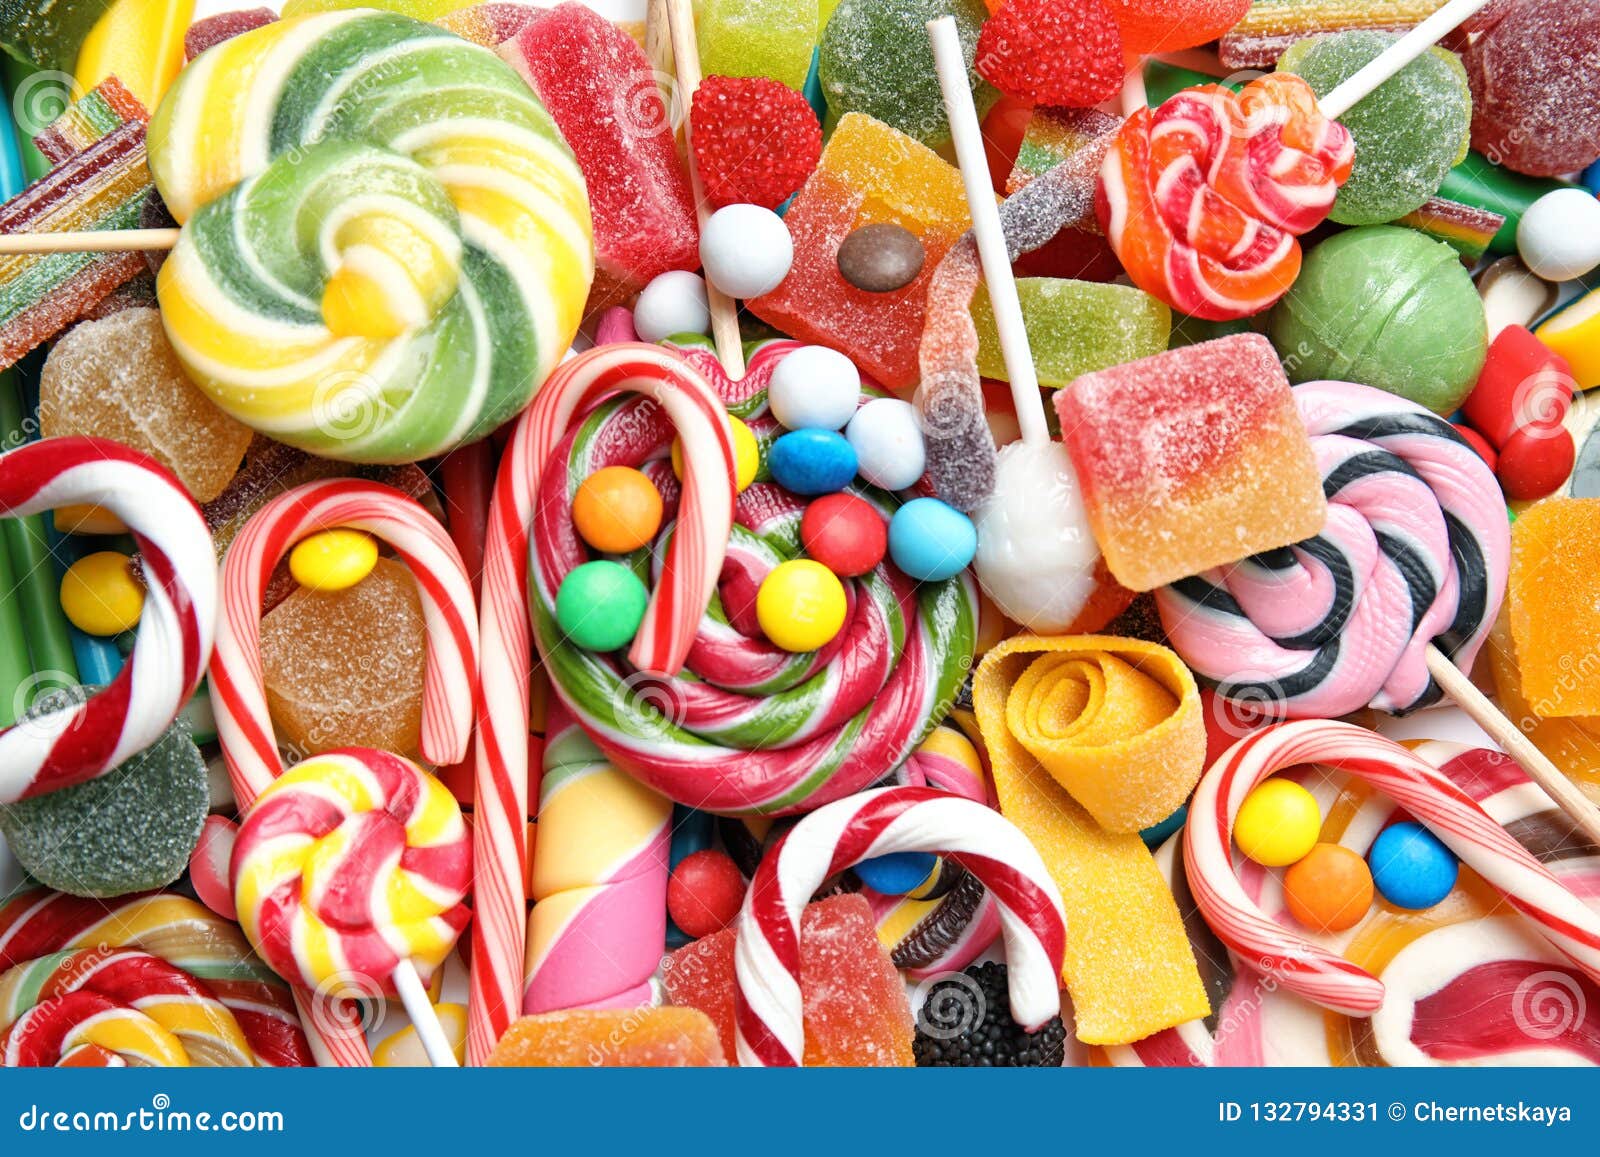 Many Different Yummy Candies As Background Stock Image Image Of Belts